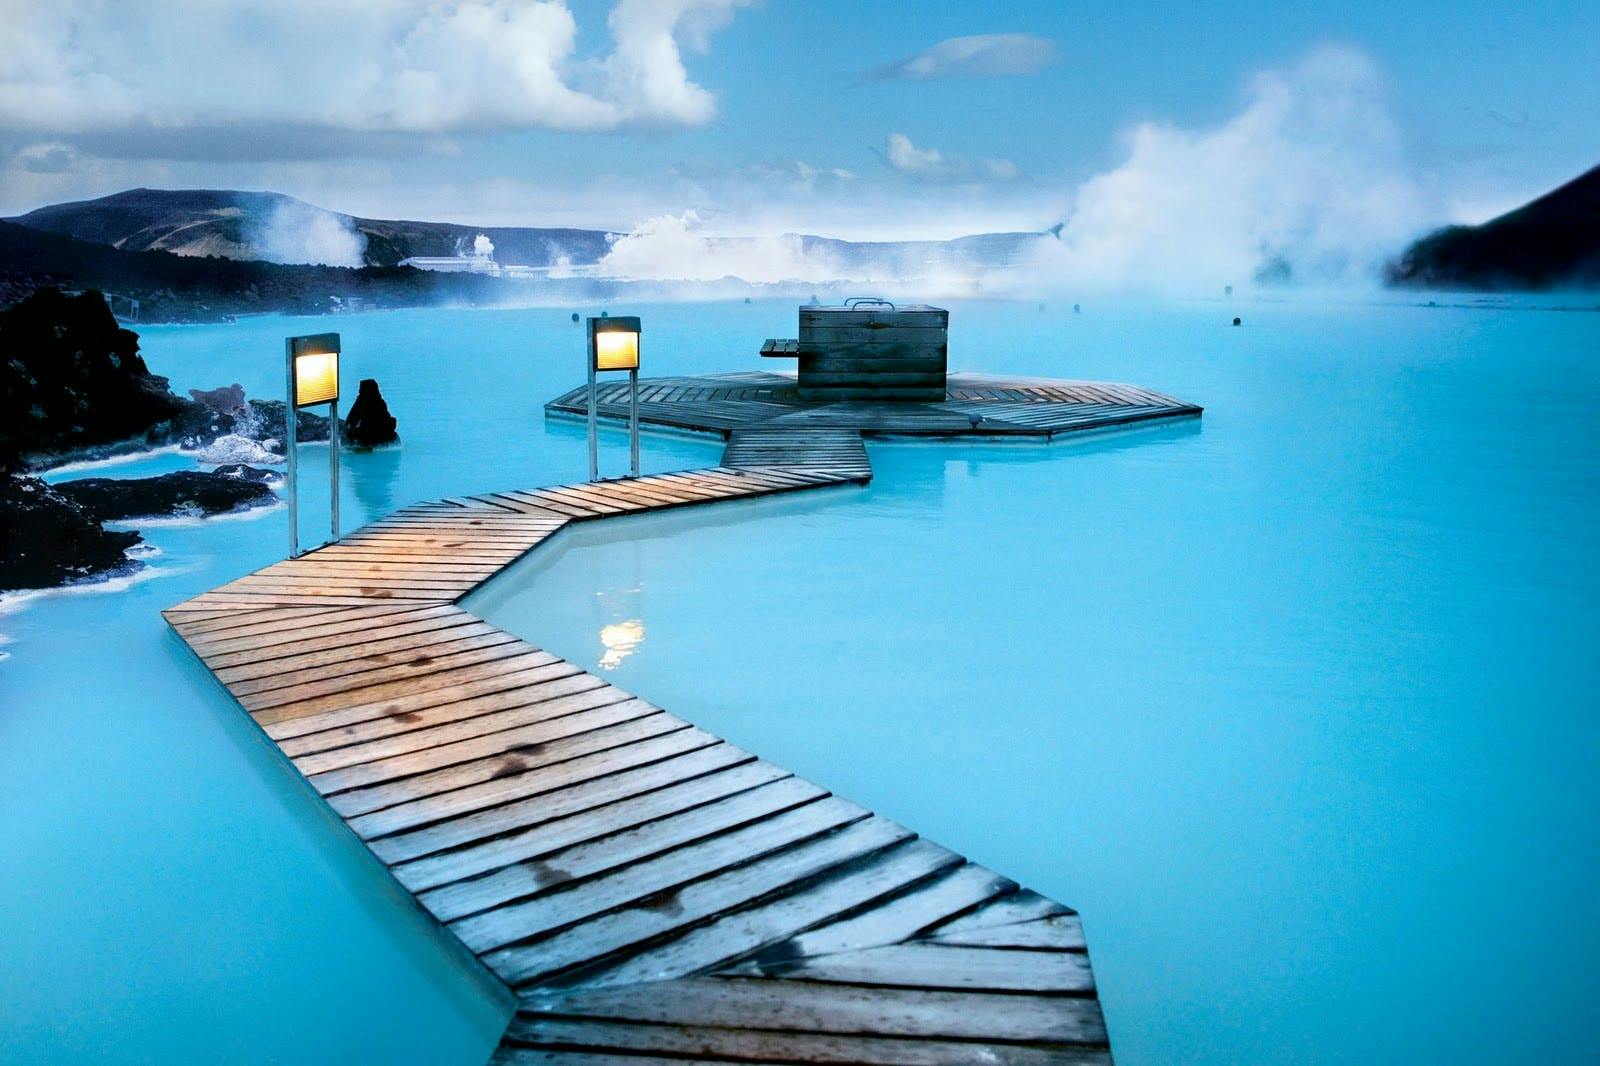 The Blue Lagoon Spa has become an iconic location in Iceland